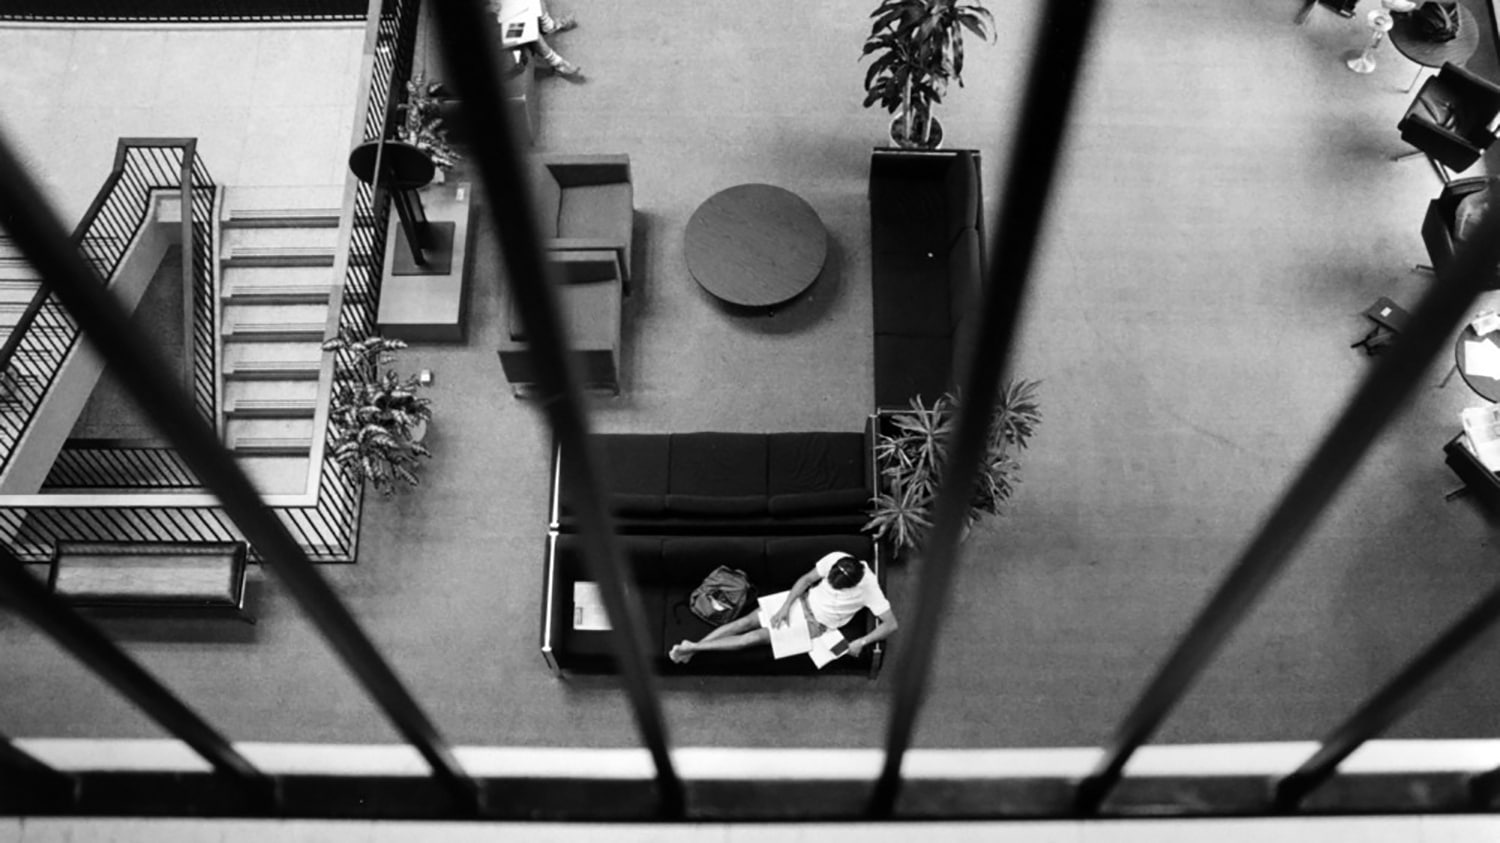 A black and white archival photo shows an overhead view of a student reading on a couch inside the University Student Center.